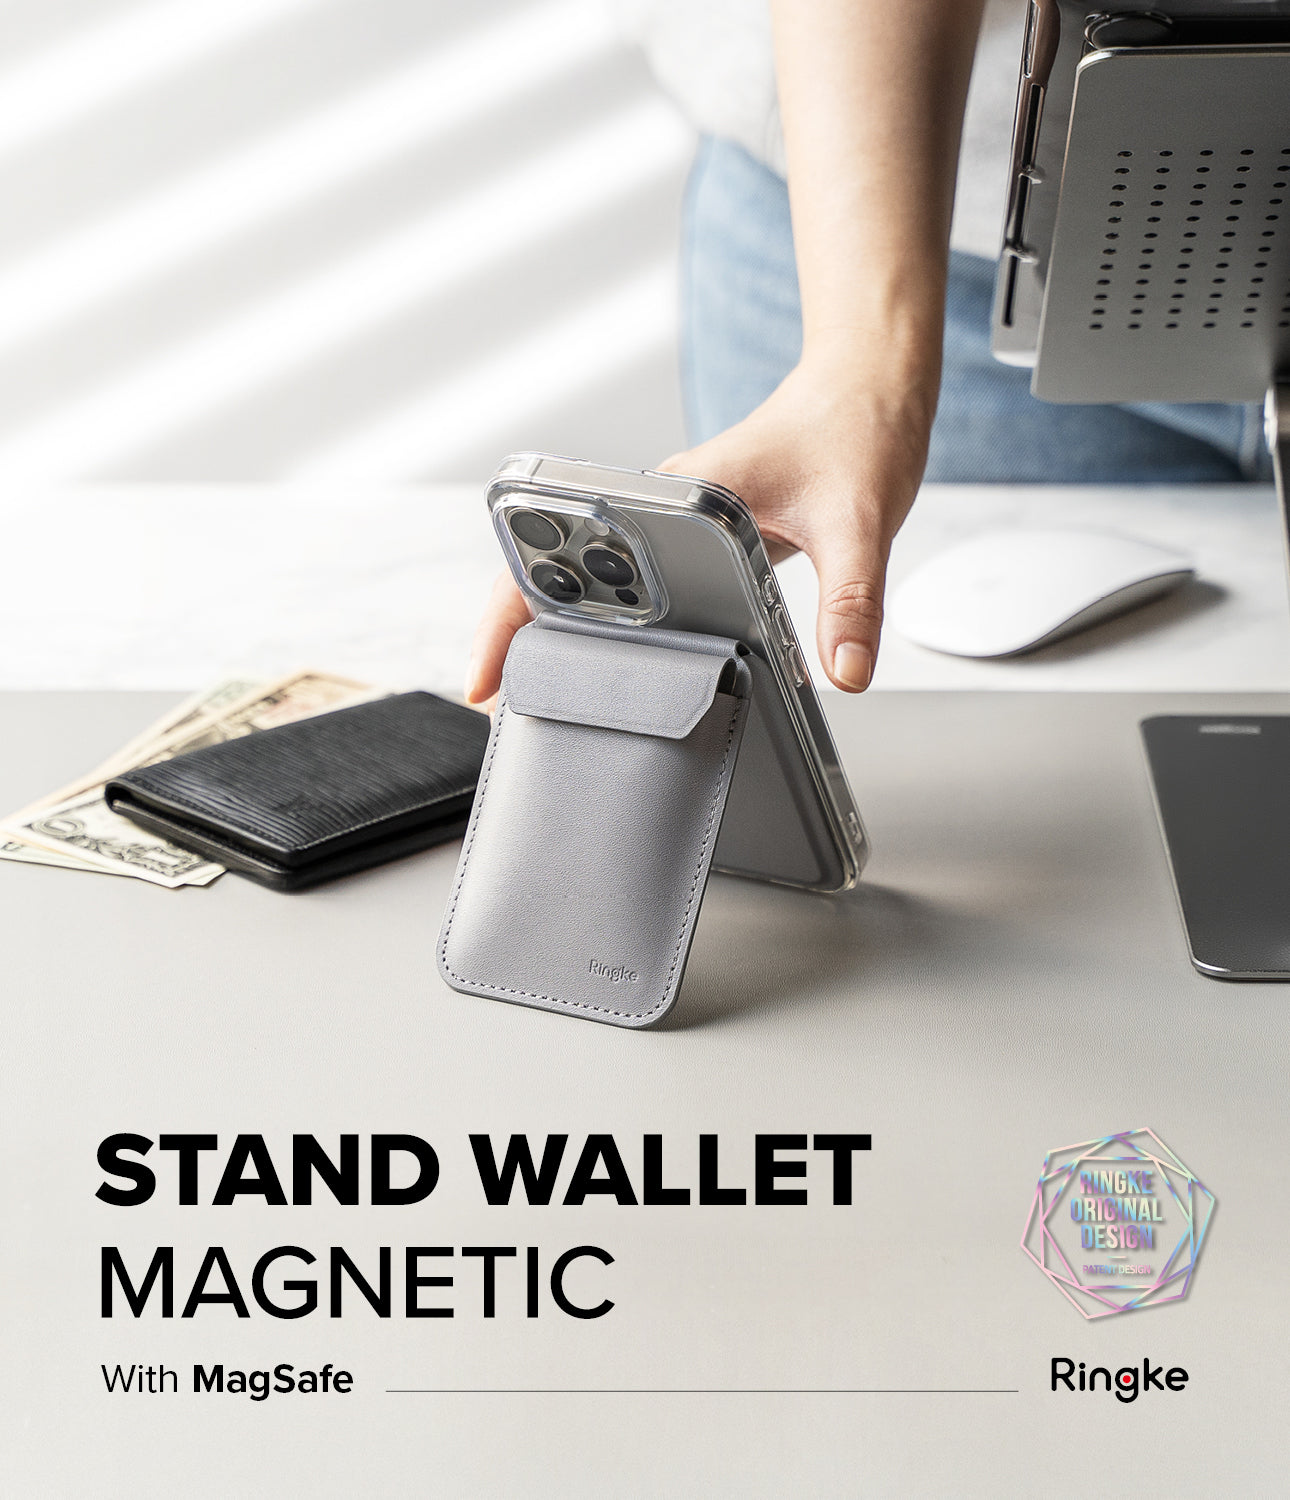 Ringke Stand Wallet Magnetic - By Ringke